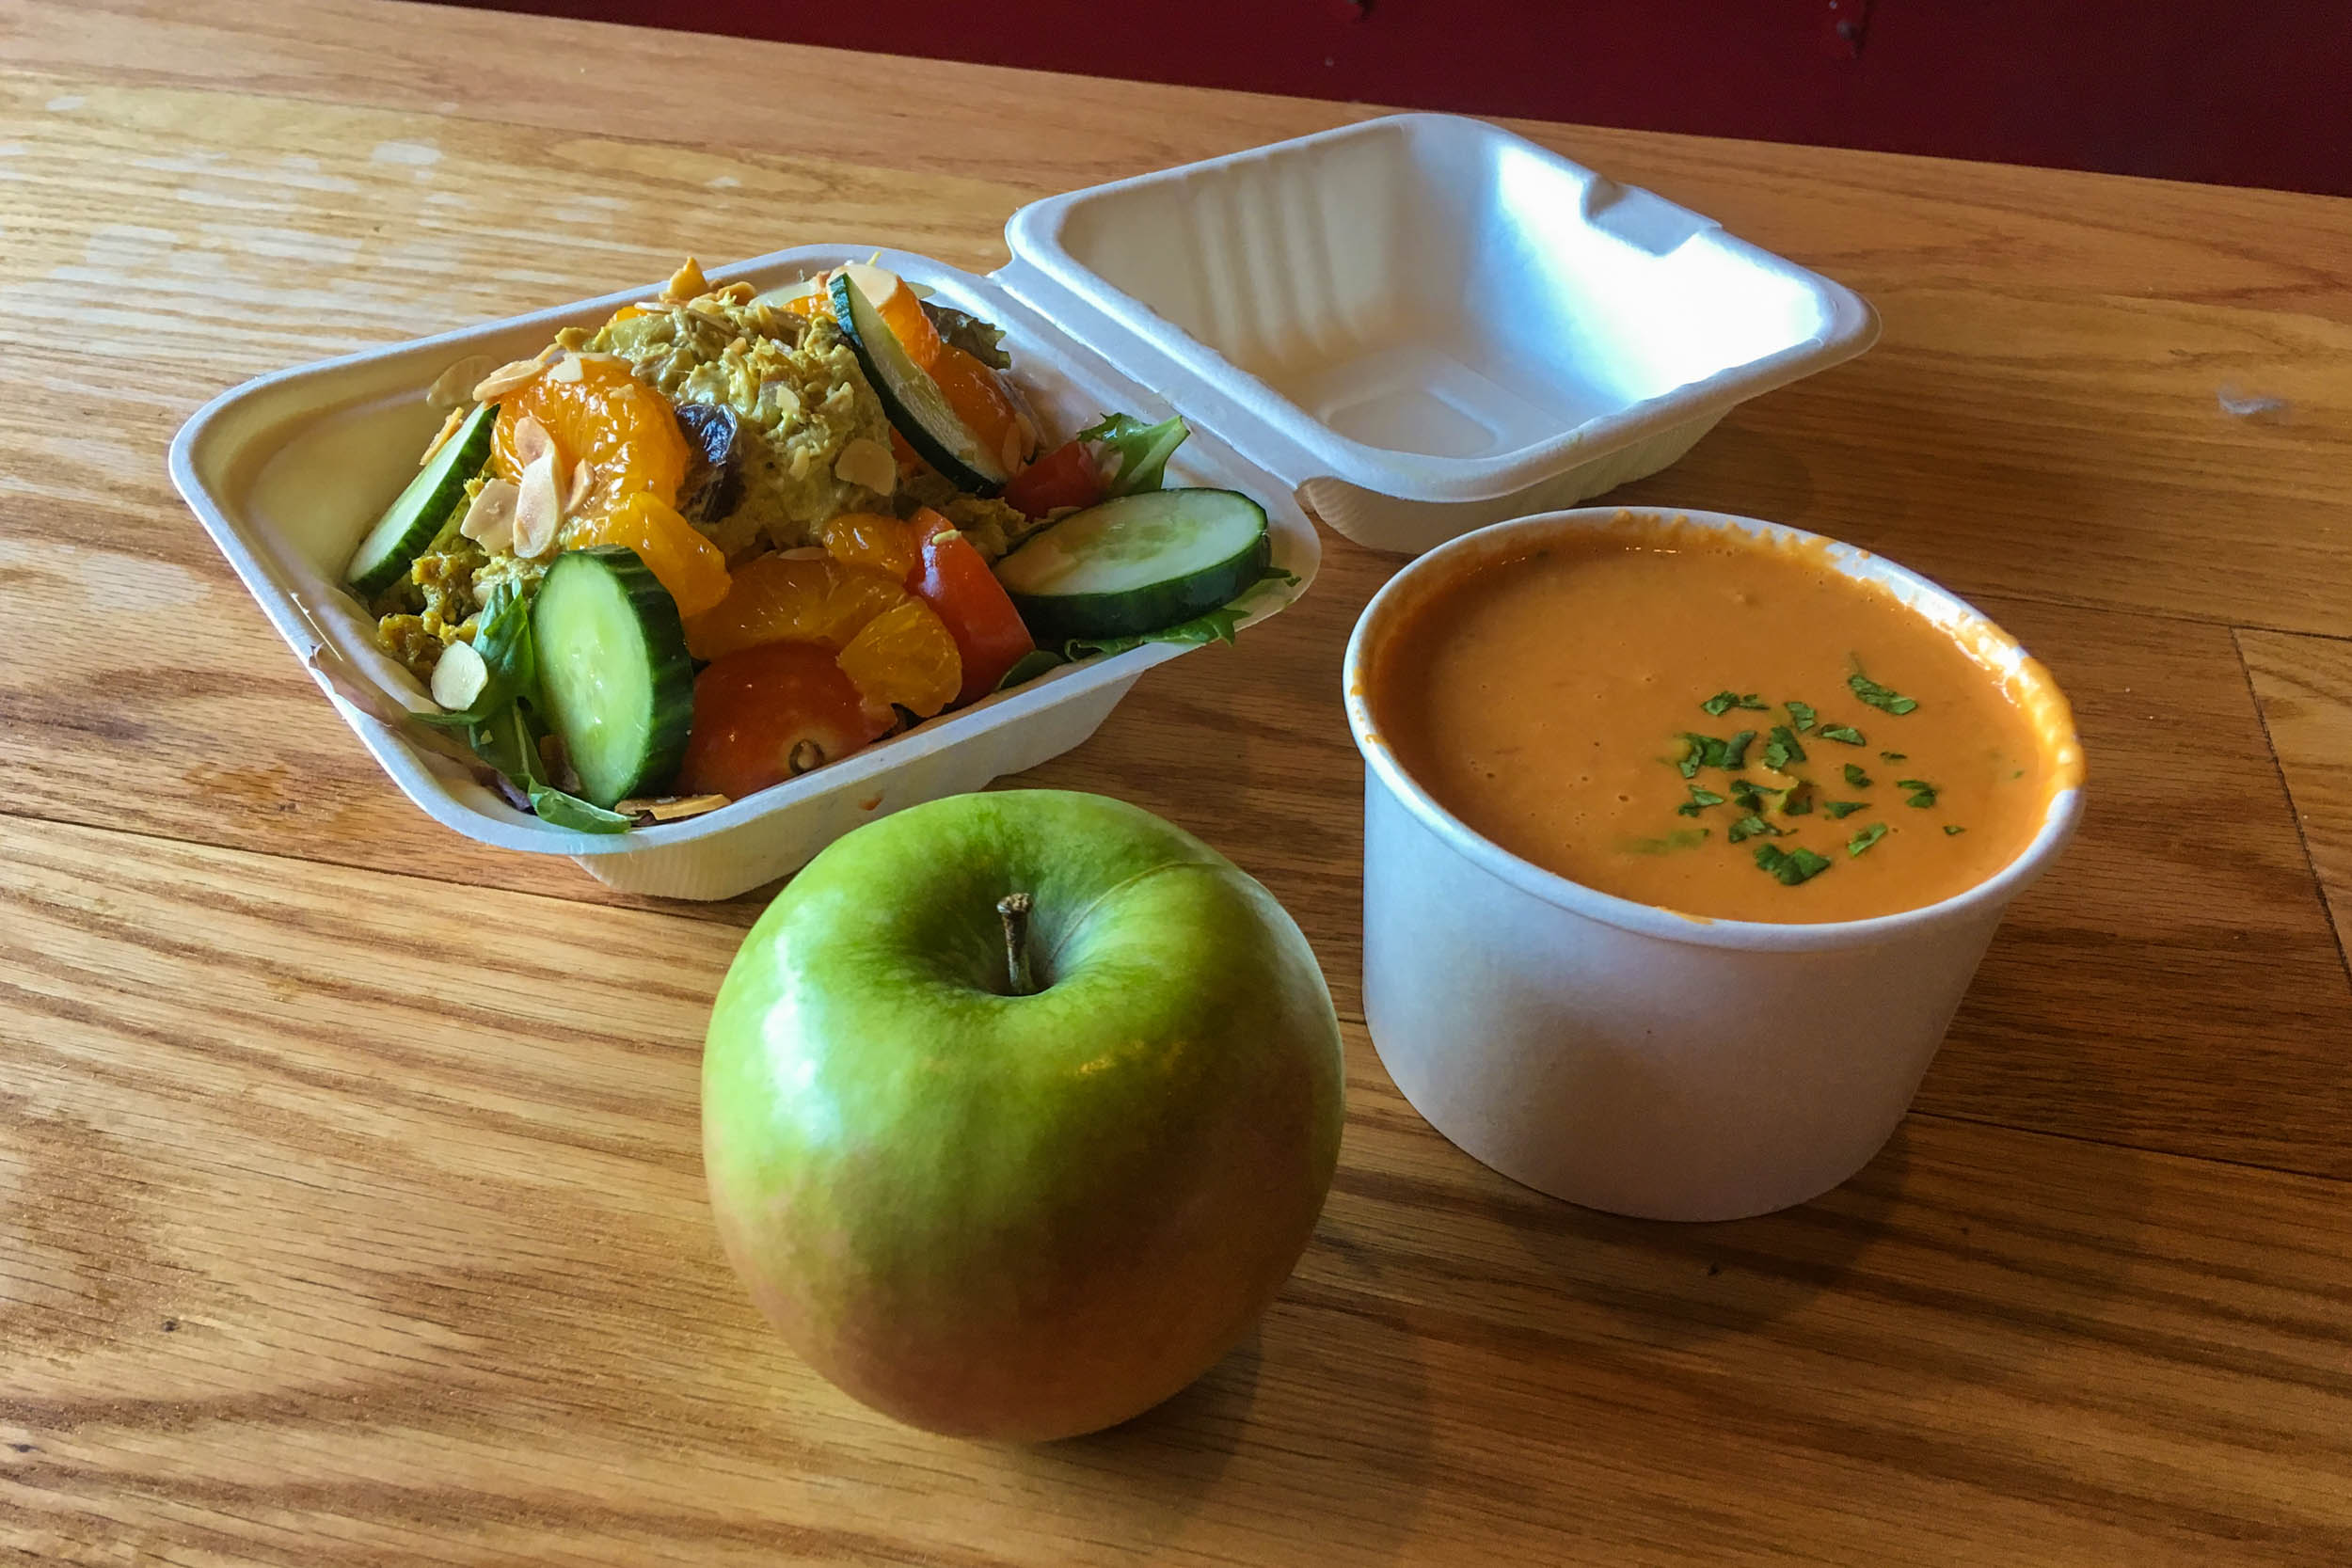 Salad in a box, an apple, and a bowl of soup